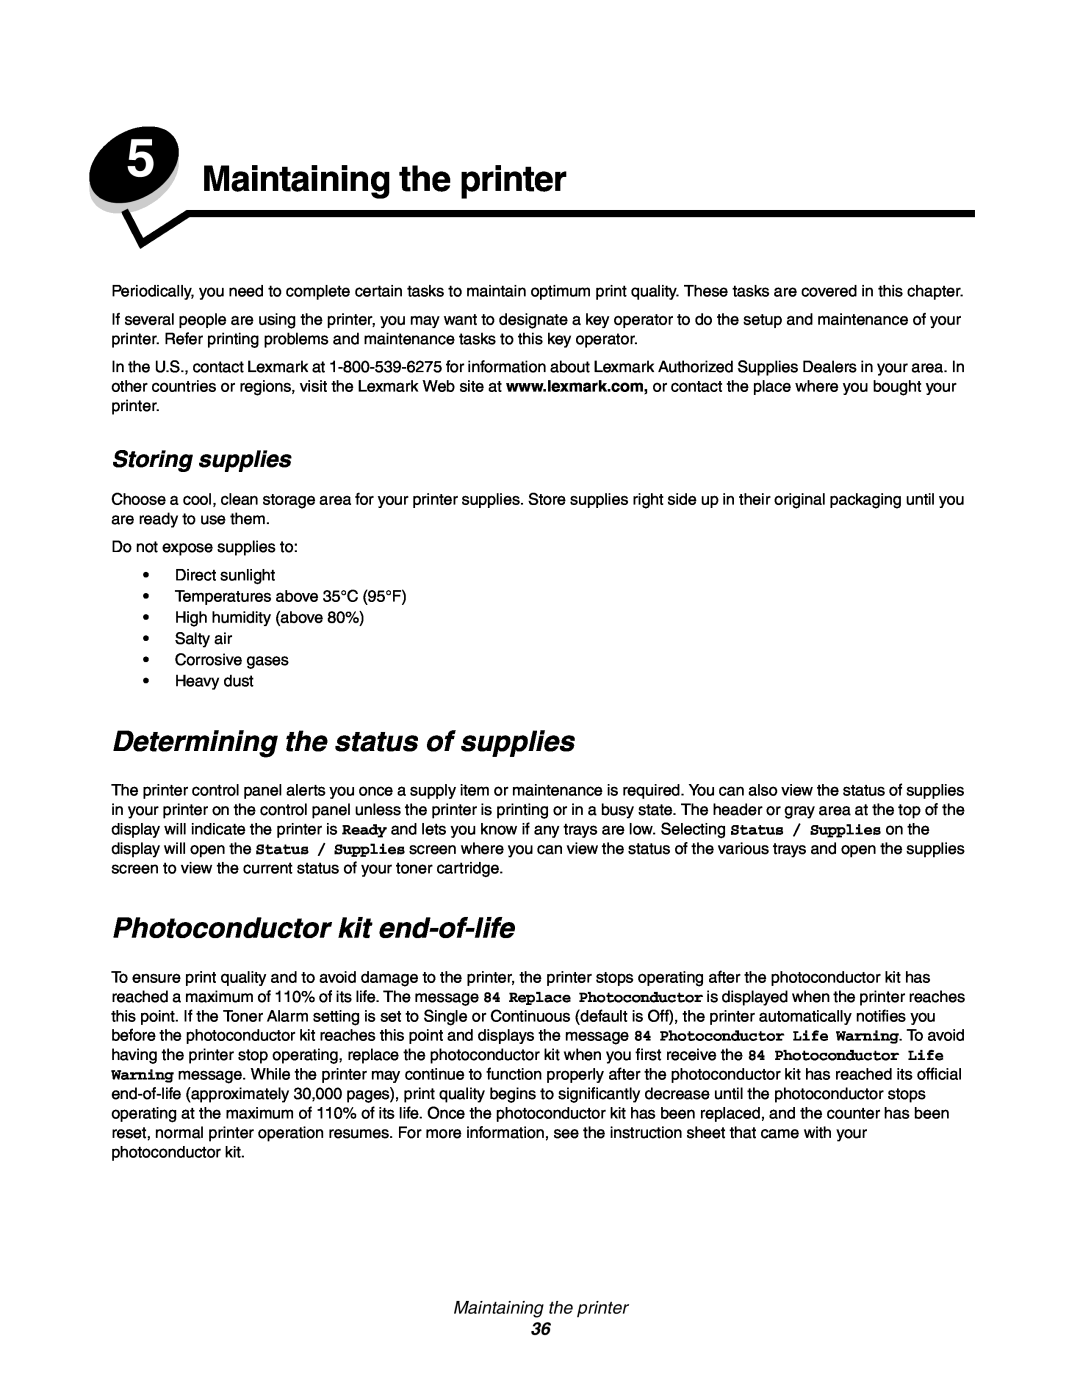 Lexmark 450dn manual Maintaining the printer, Determining the status of supplies, Photoconductor kit end-of-life 